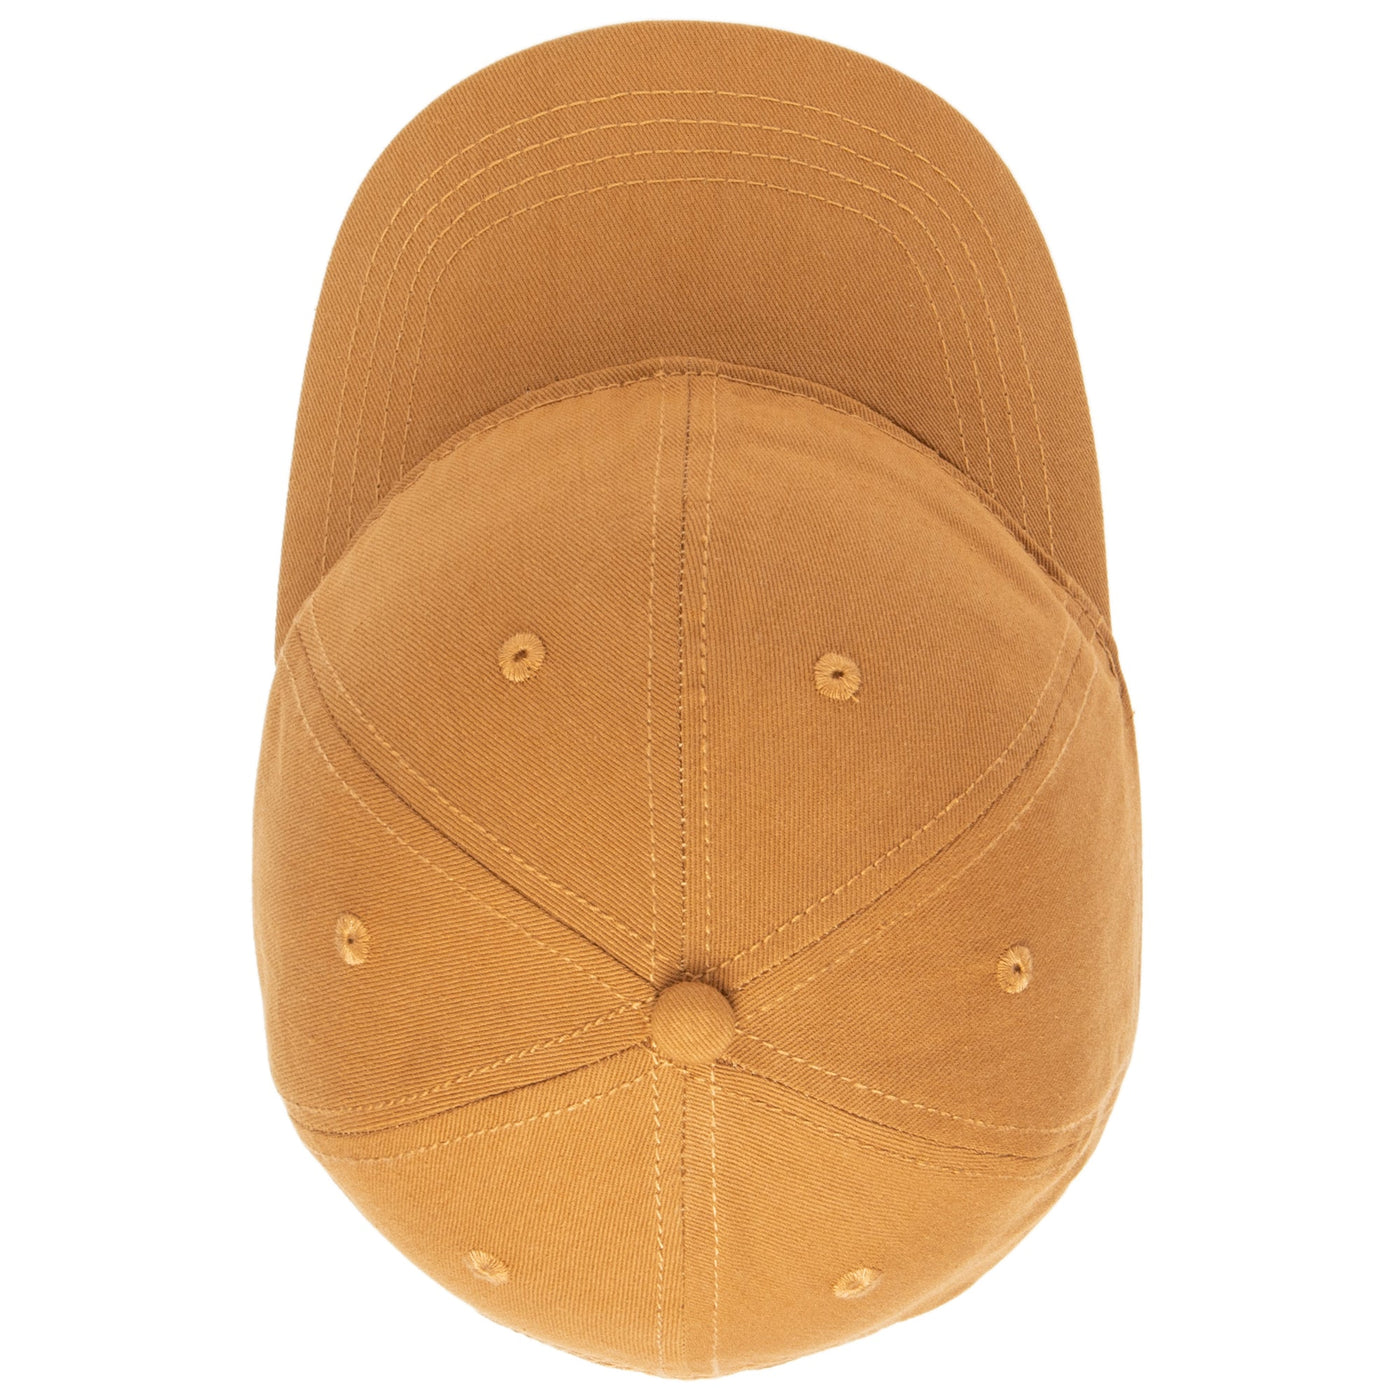 CAP - Women's Washed Ball Cap With Adjustable Leather Back